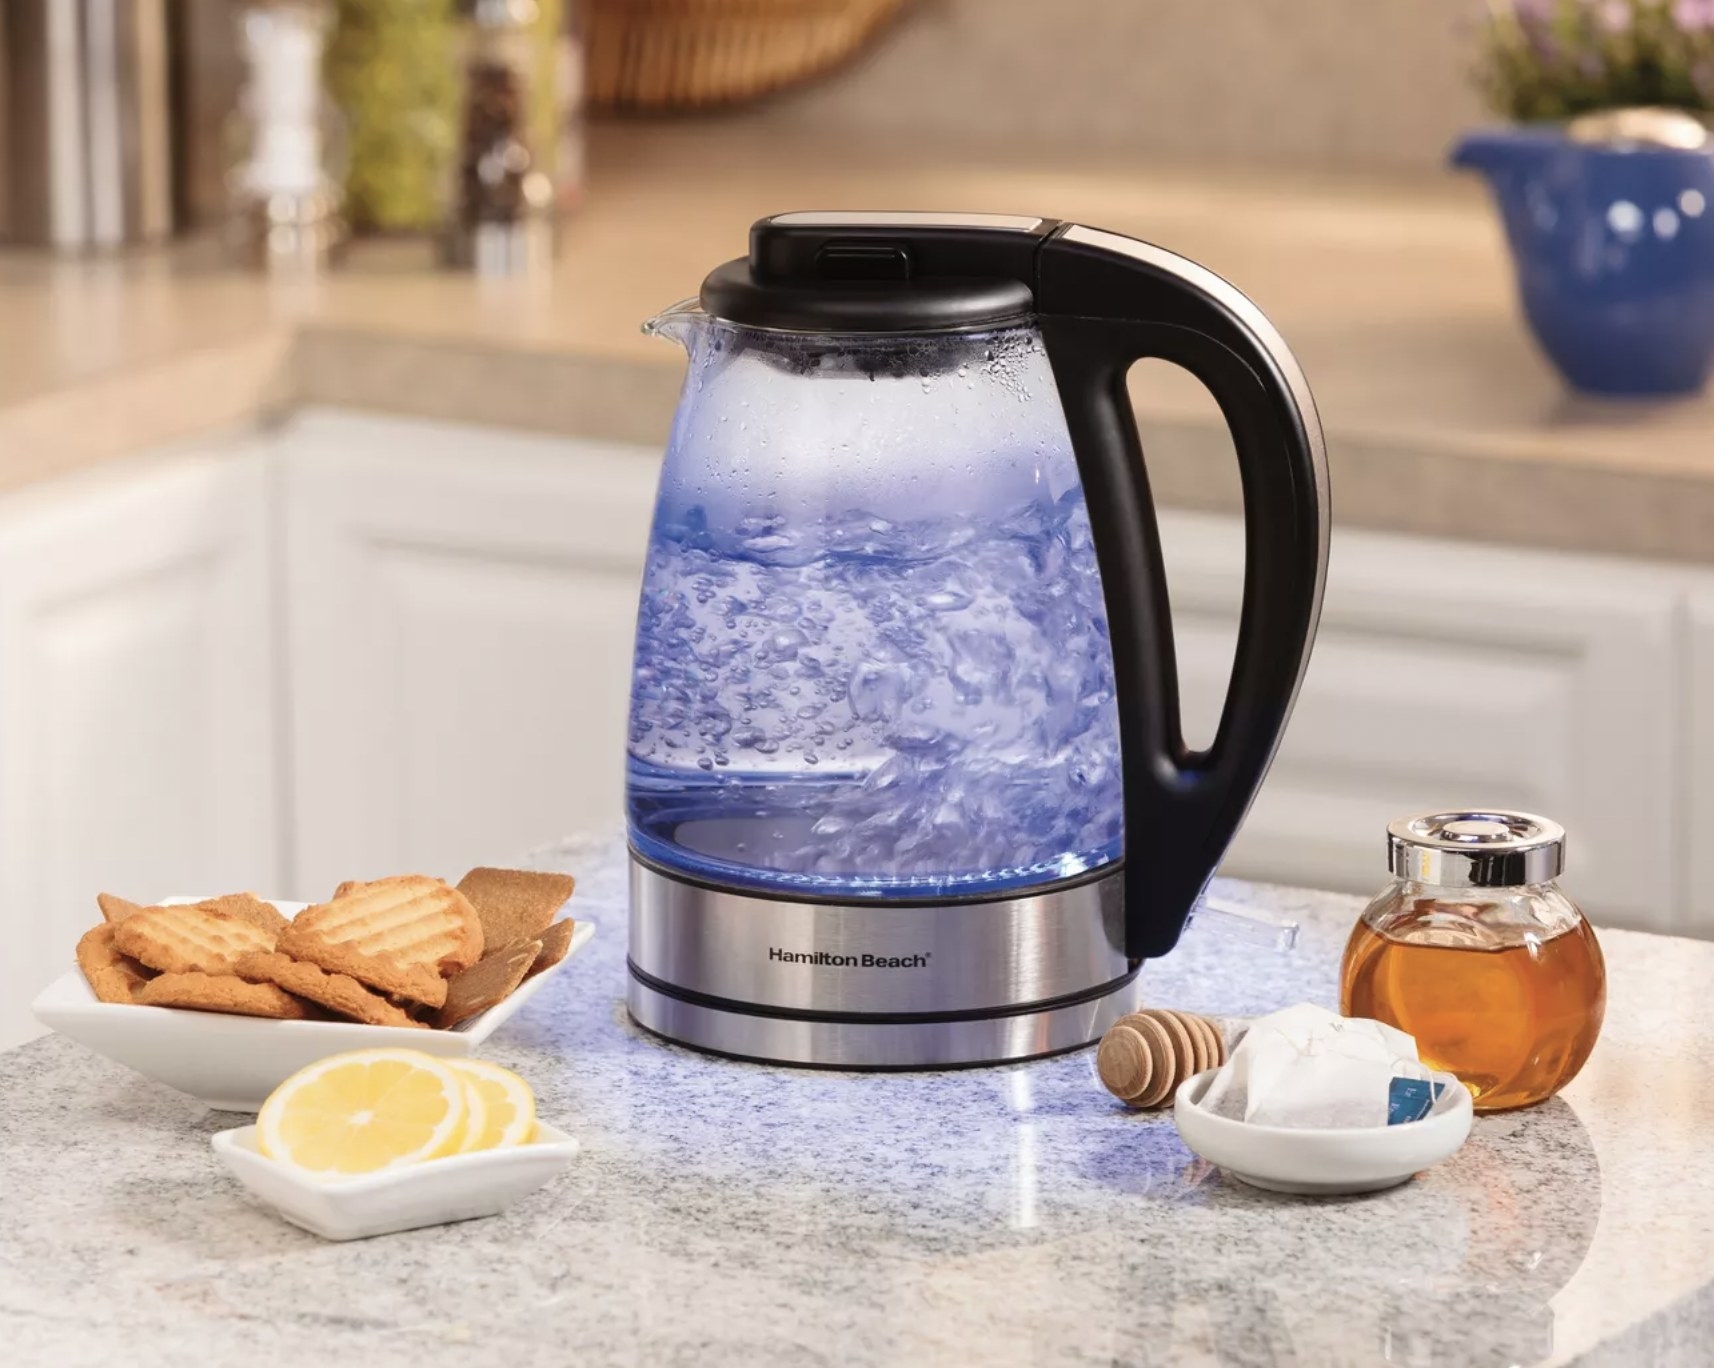 The clear electric tea kettle